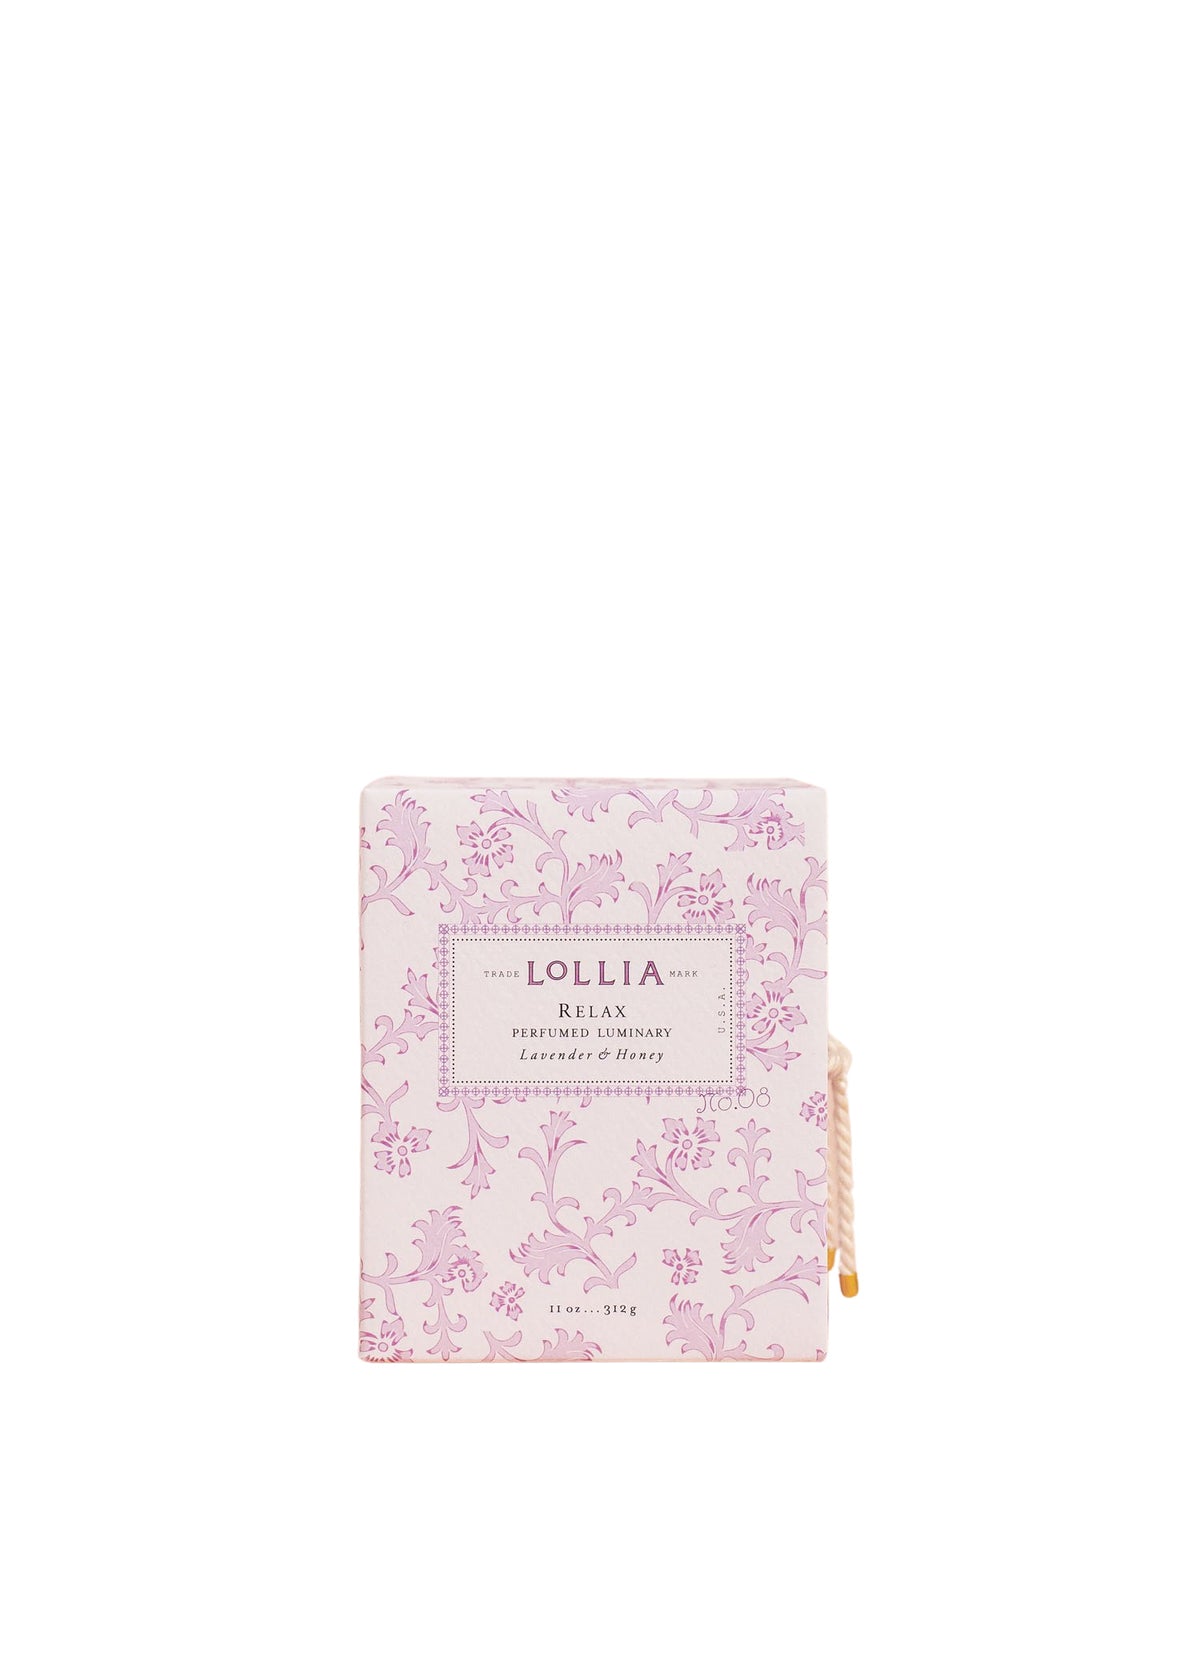 A pink book with floral patterns titled "Lollia Relax No. 08 Luminary Candle" featuring a calming lavender & honey scent, displayed on a plain white background by Margot Elena.